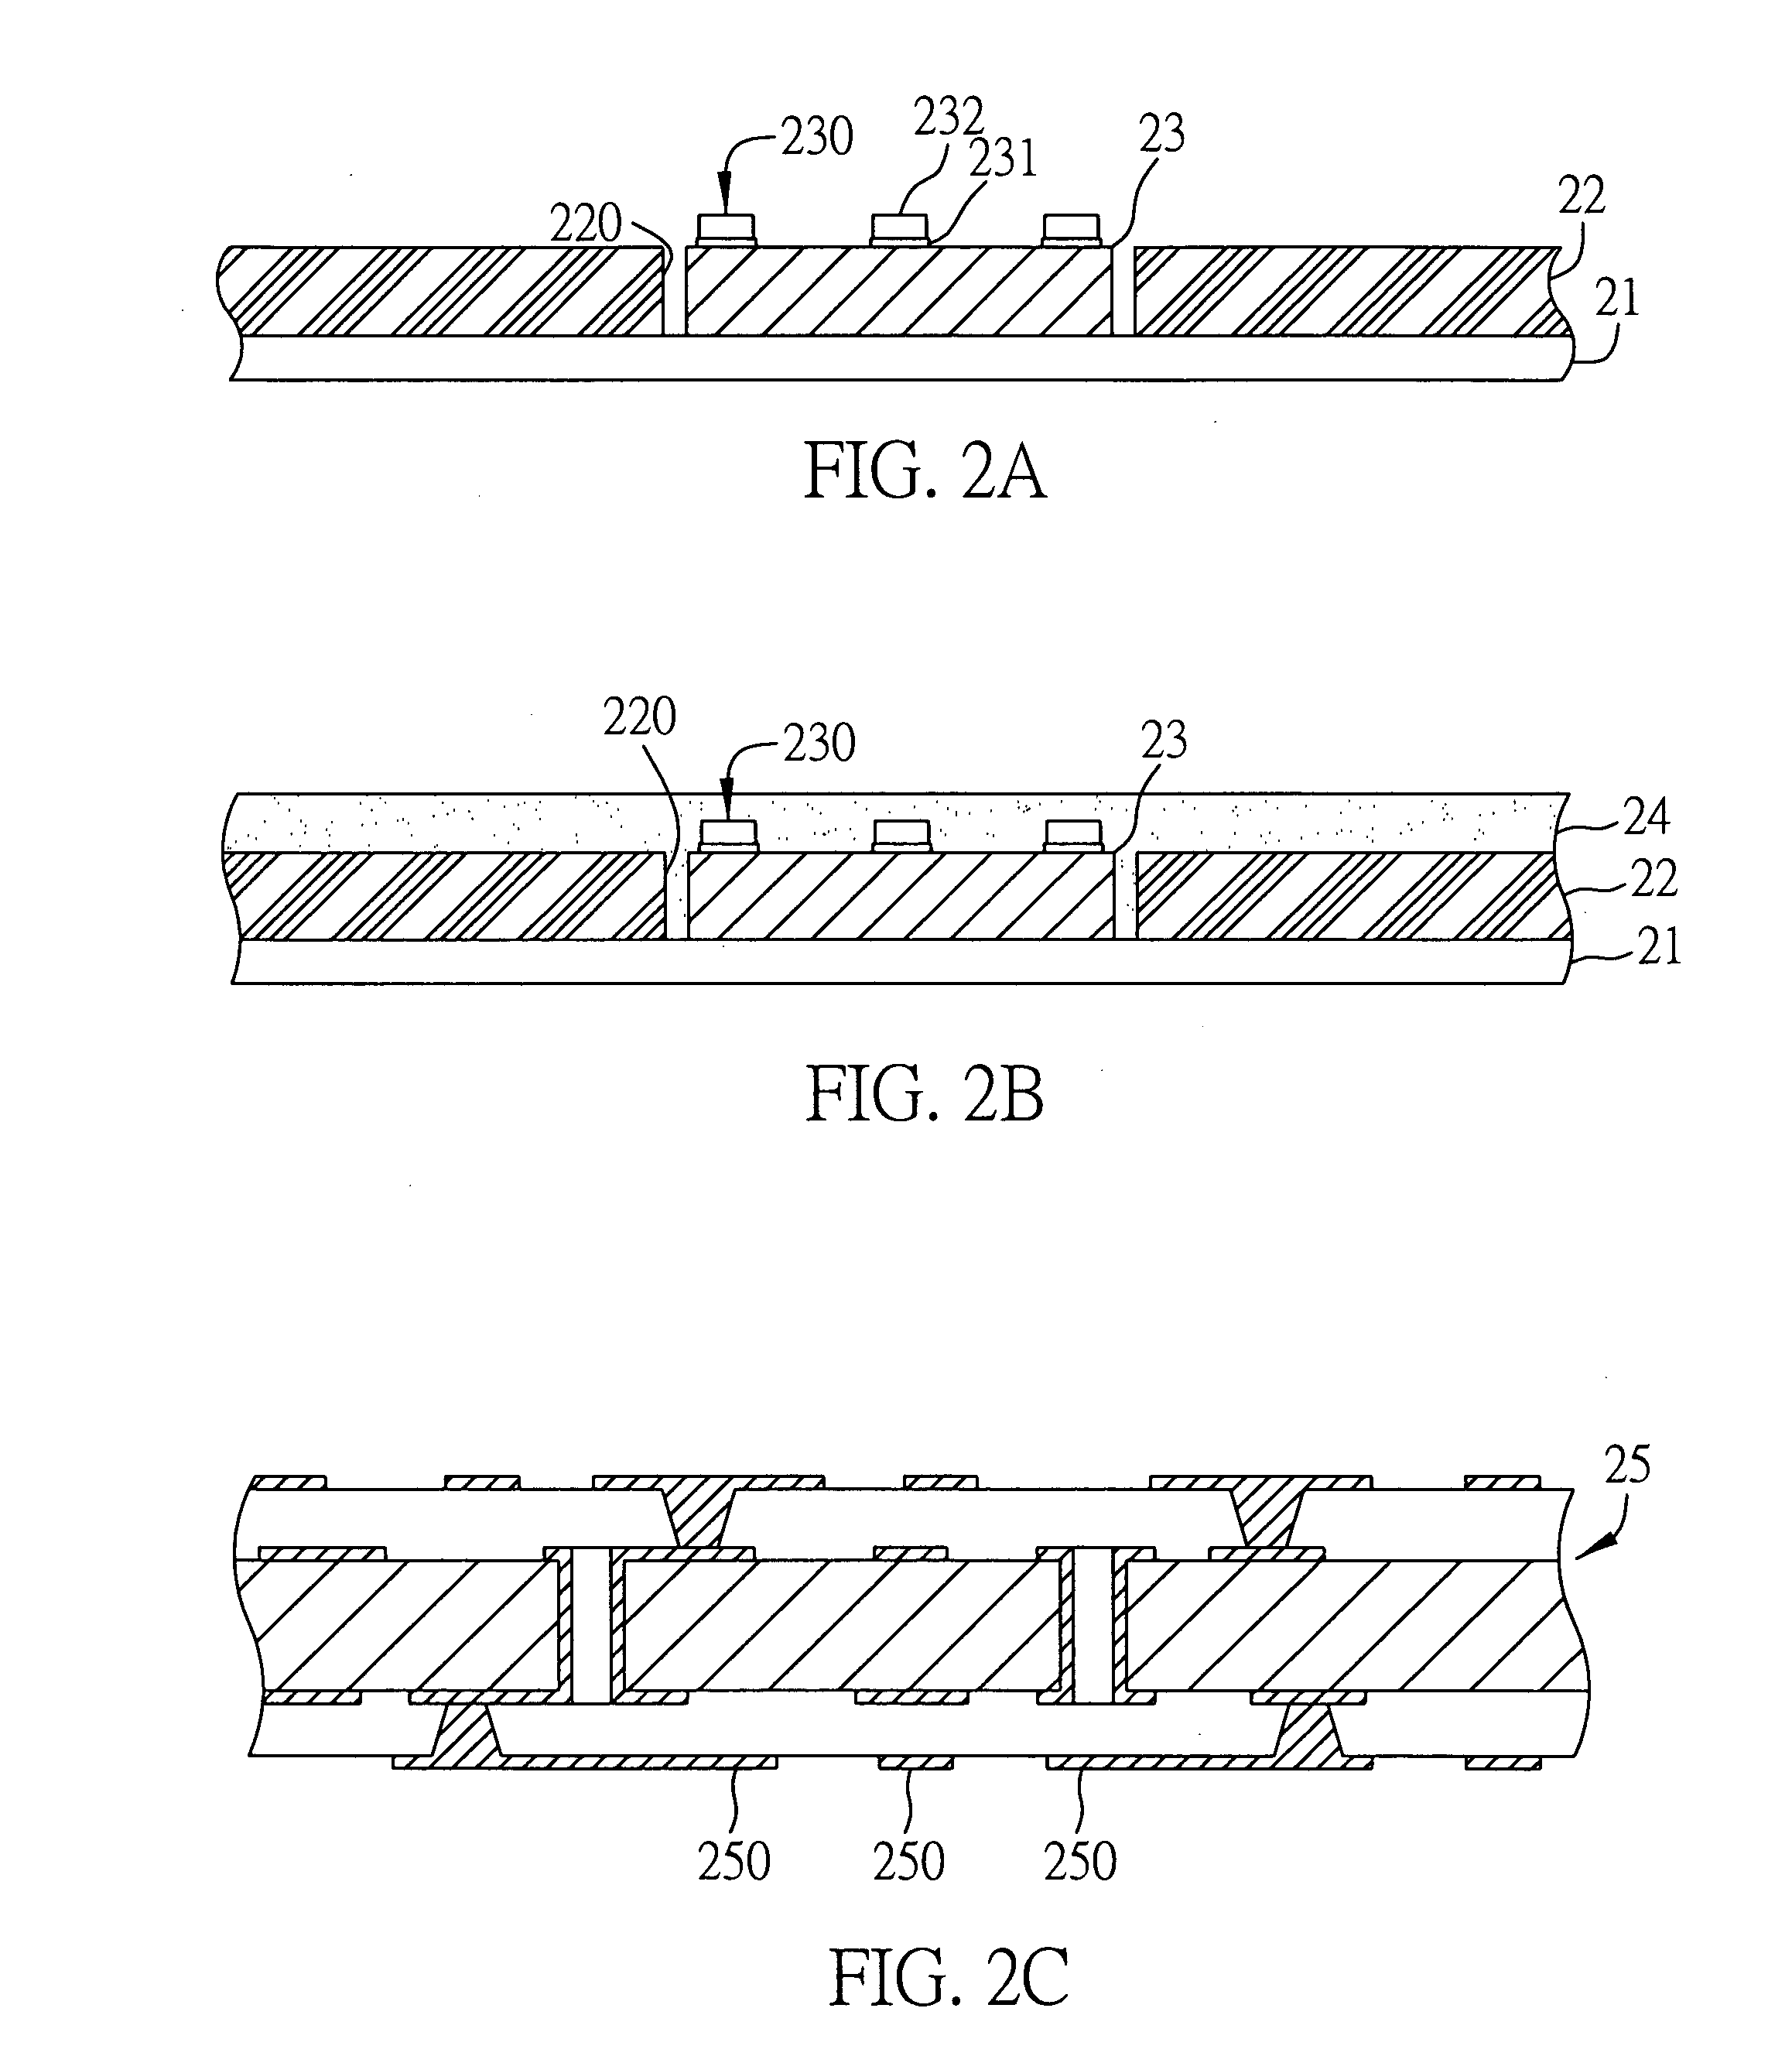 Circuit board structure integrated with semiconductor chip and method of fabricating the same